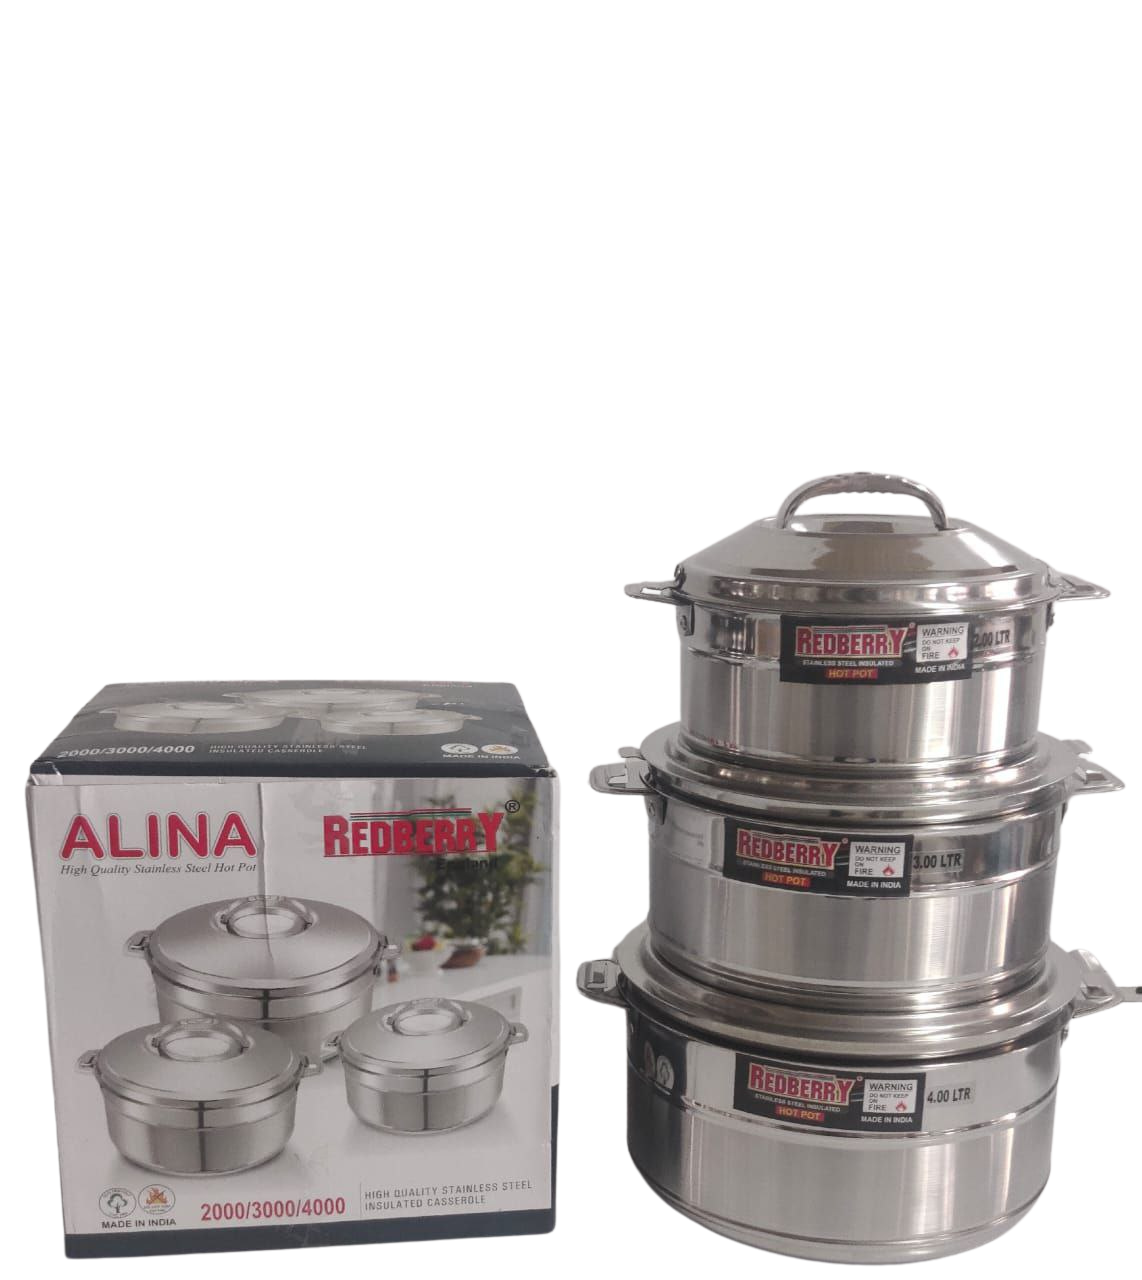 Redberry stainless Steel Hot pot 4L|6L|9L Alina Insulated Hot Pot keeps Hot